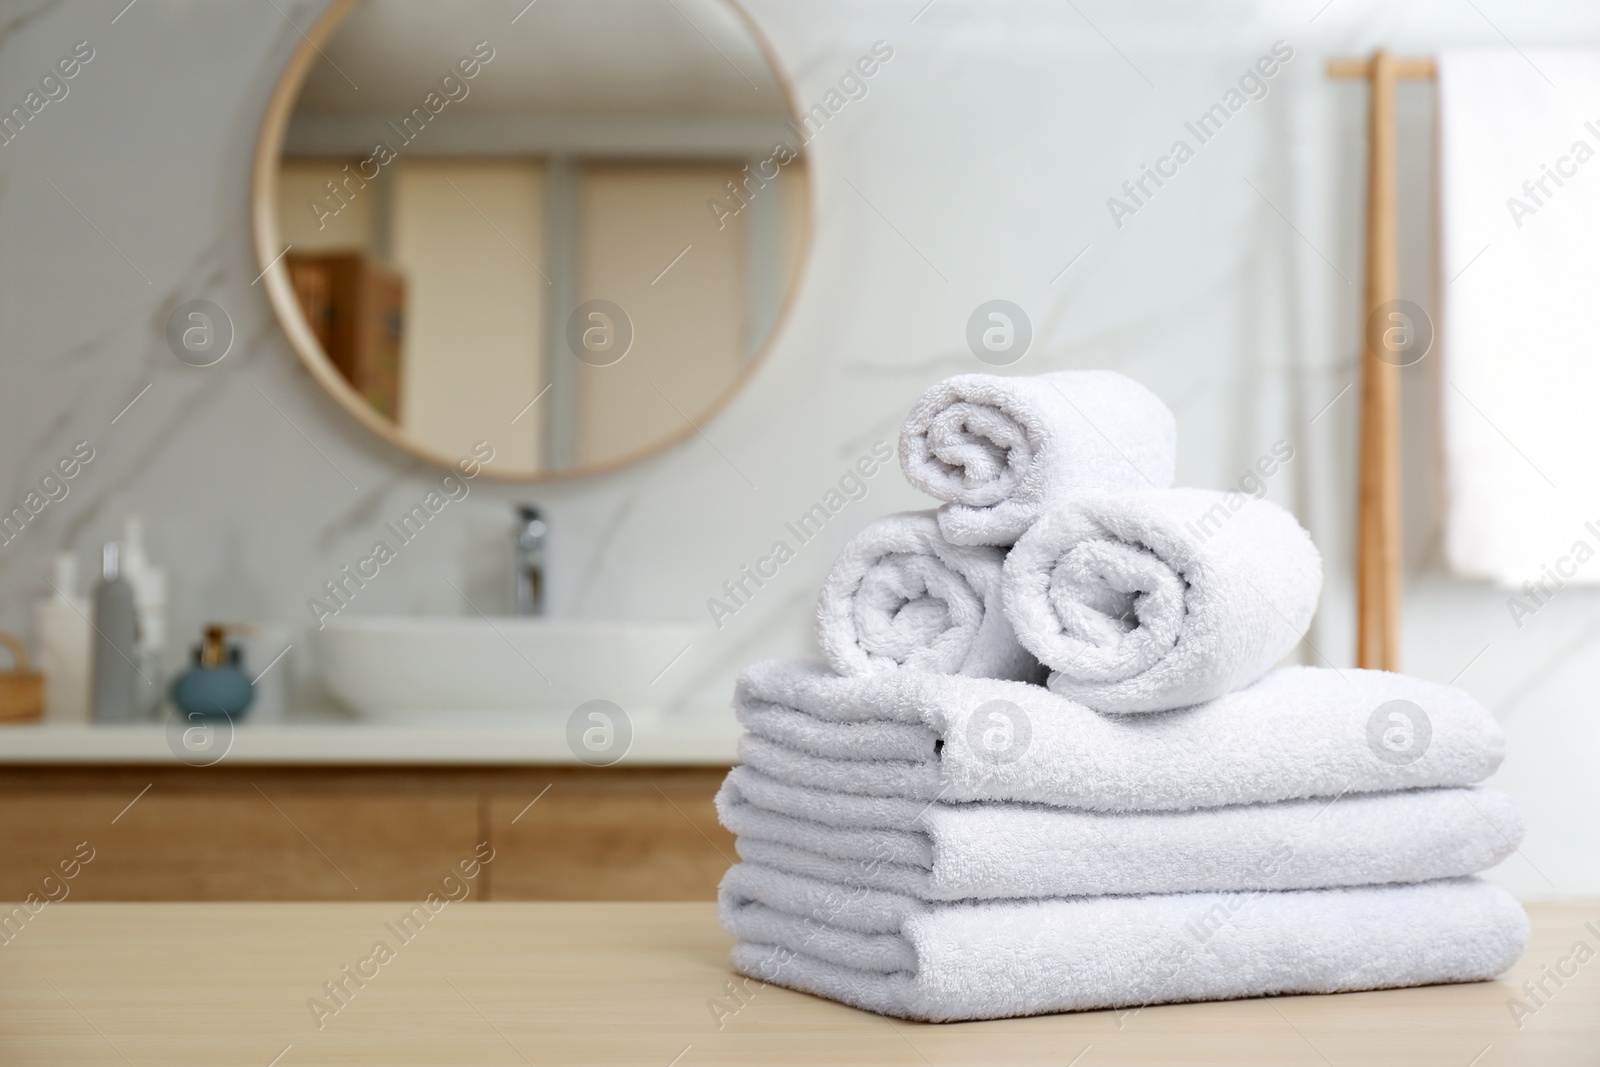 Photo of White towels on wooden table in bathroom. Space for text